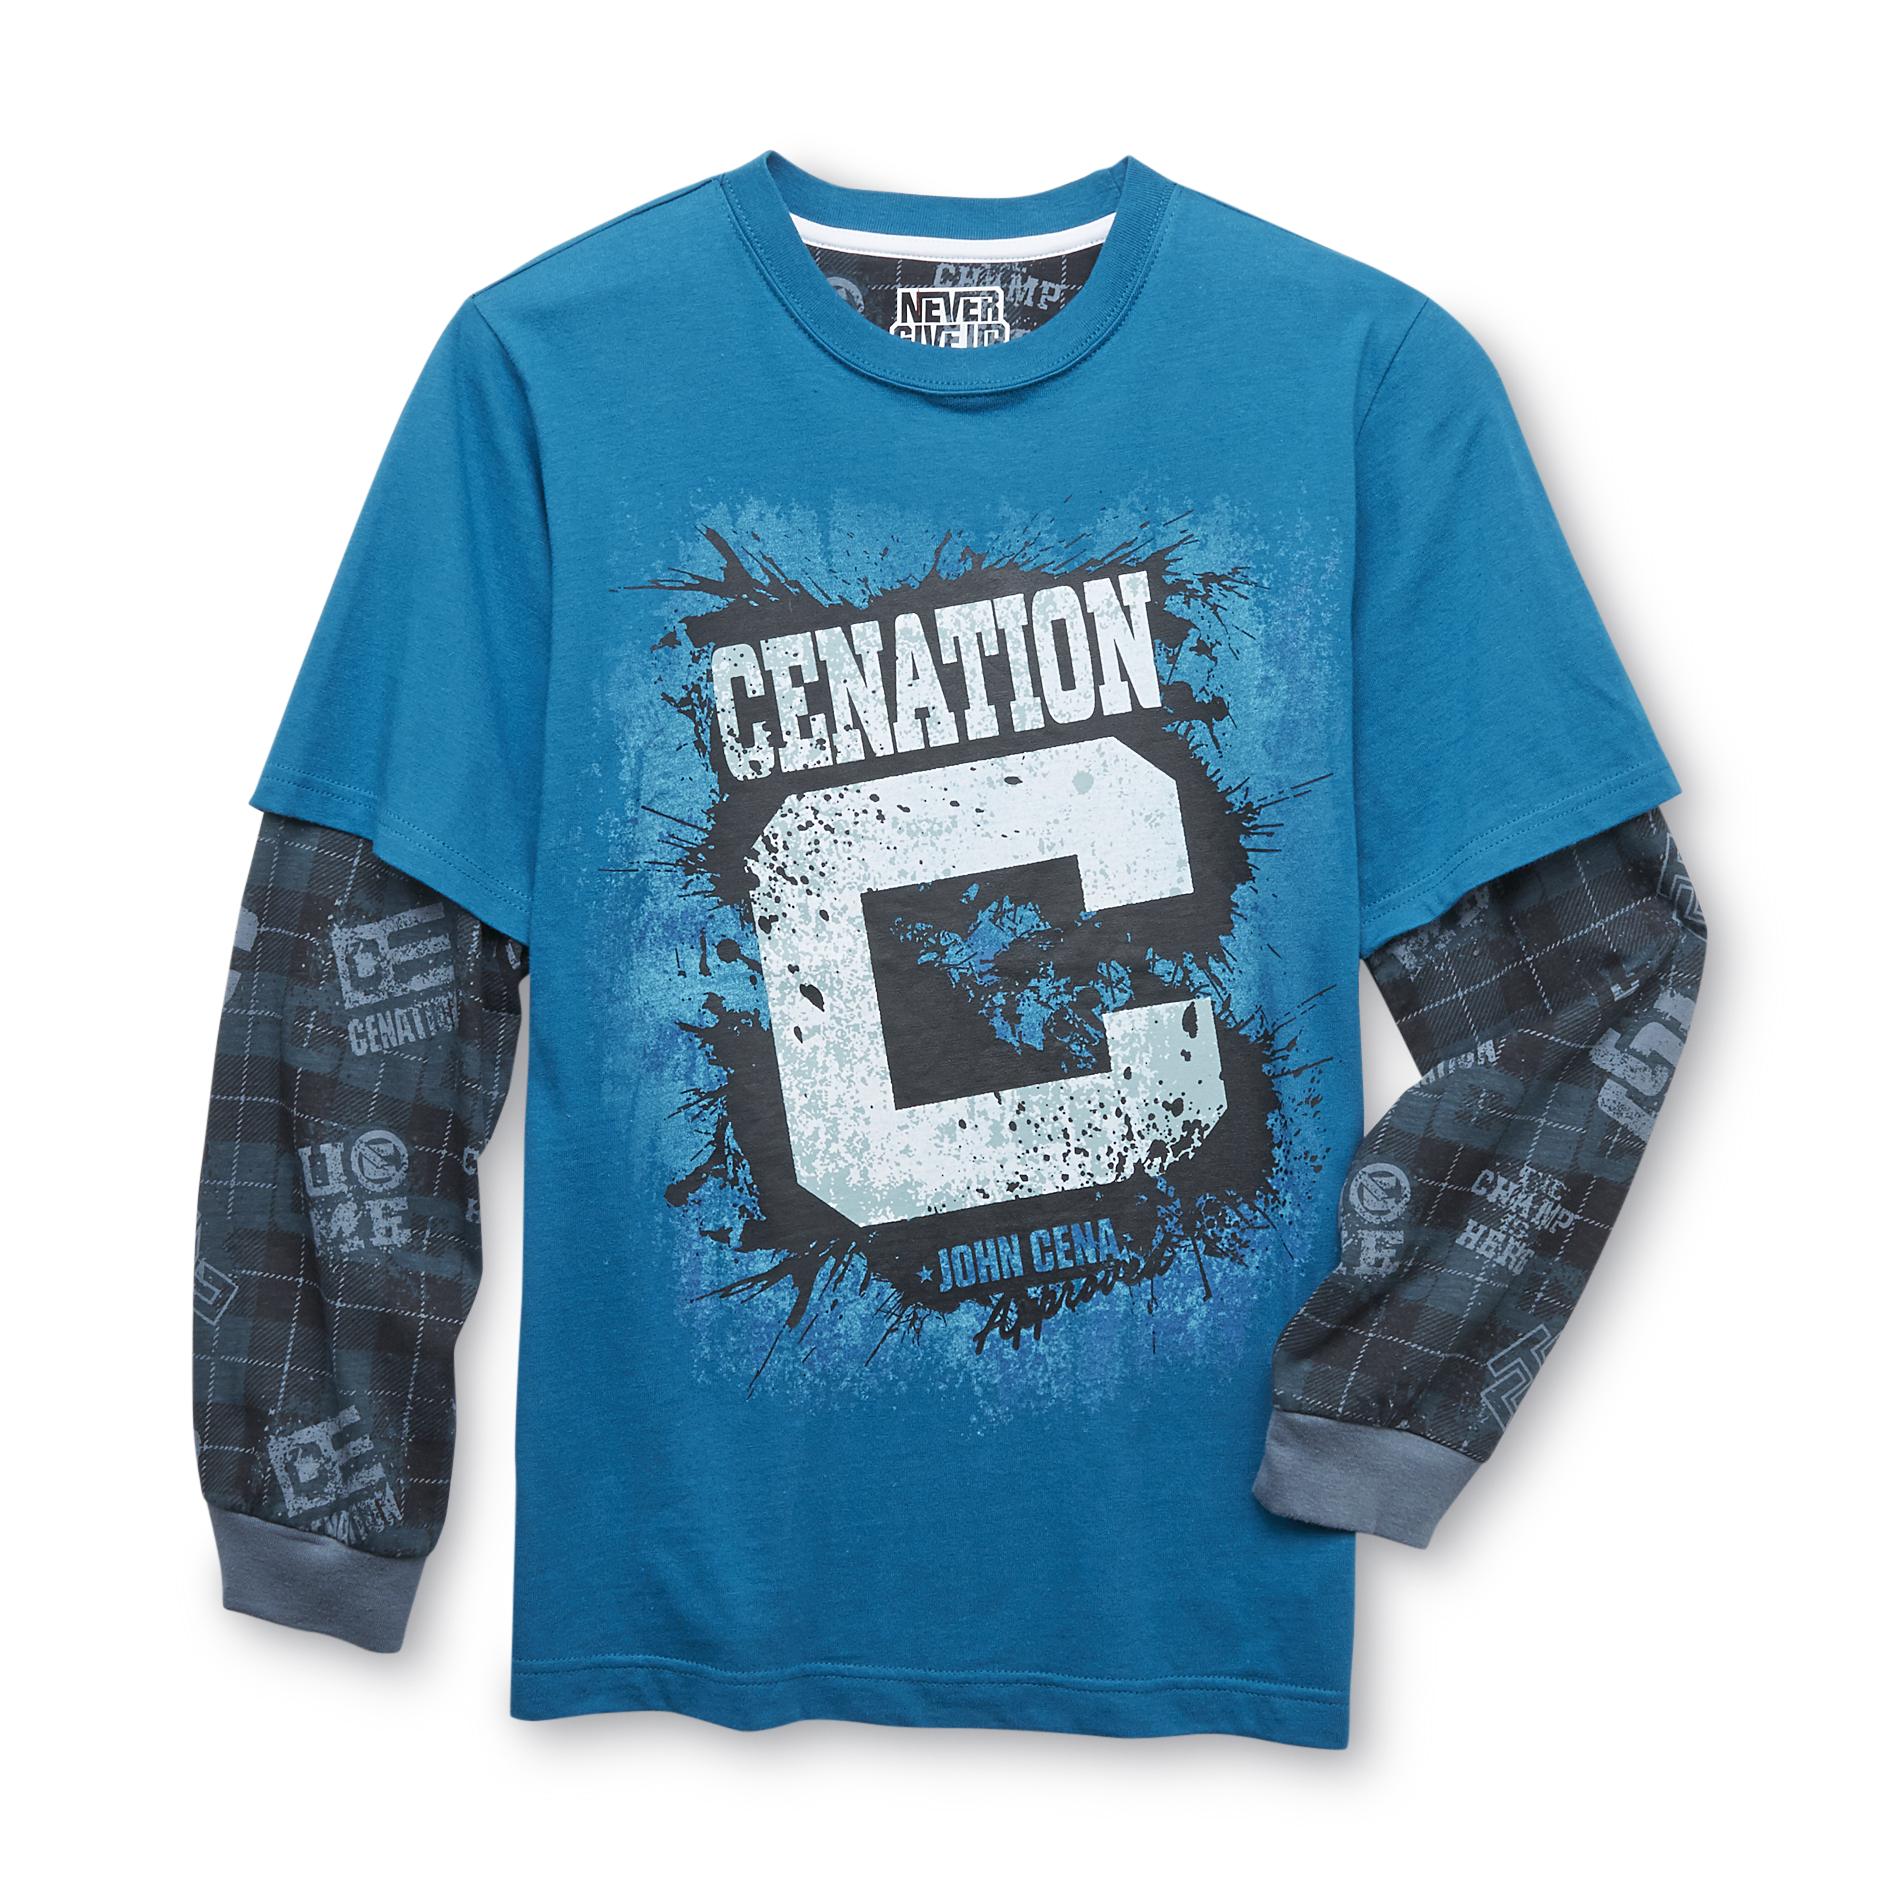 Never Give Up By John Cena Boy's Long-Sleeve Graphic T-Shirt - Cenation